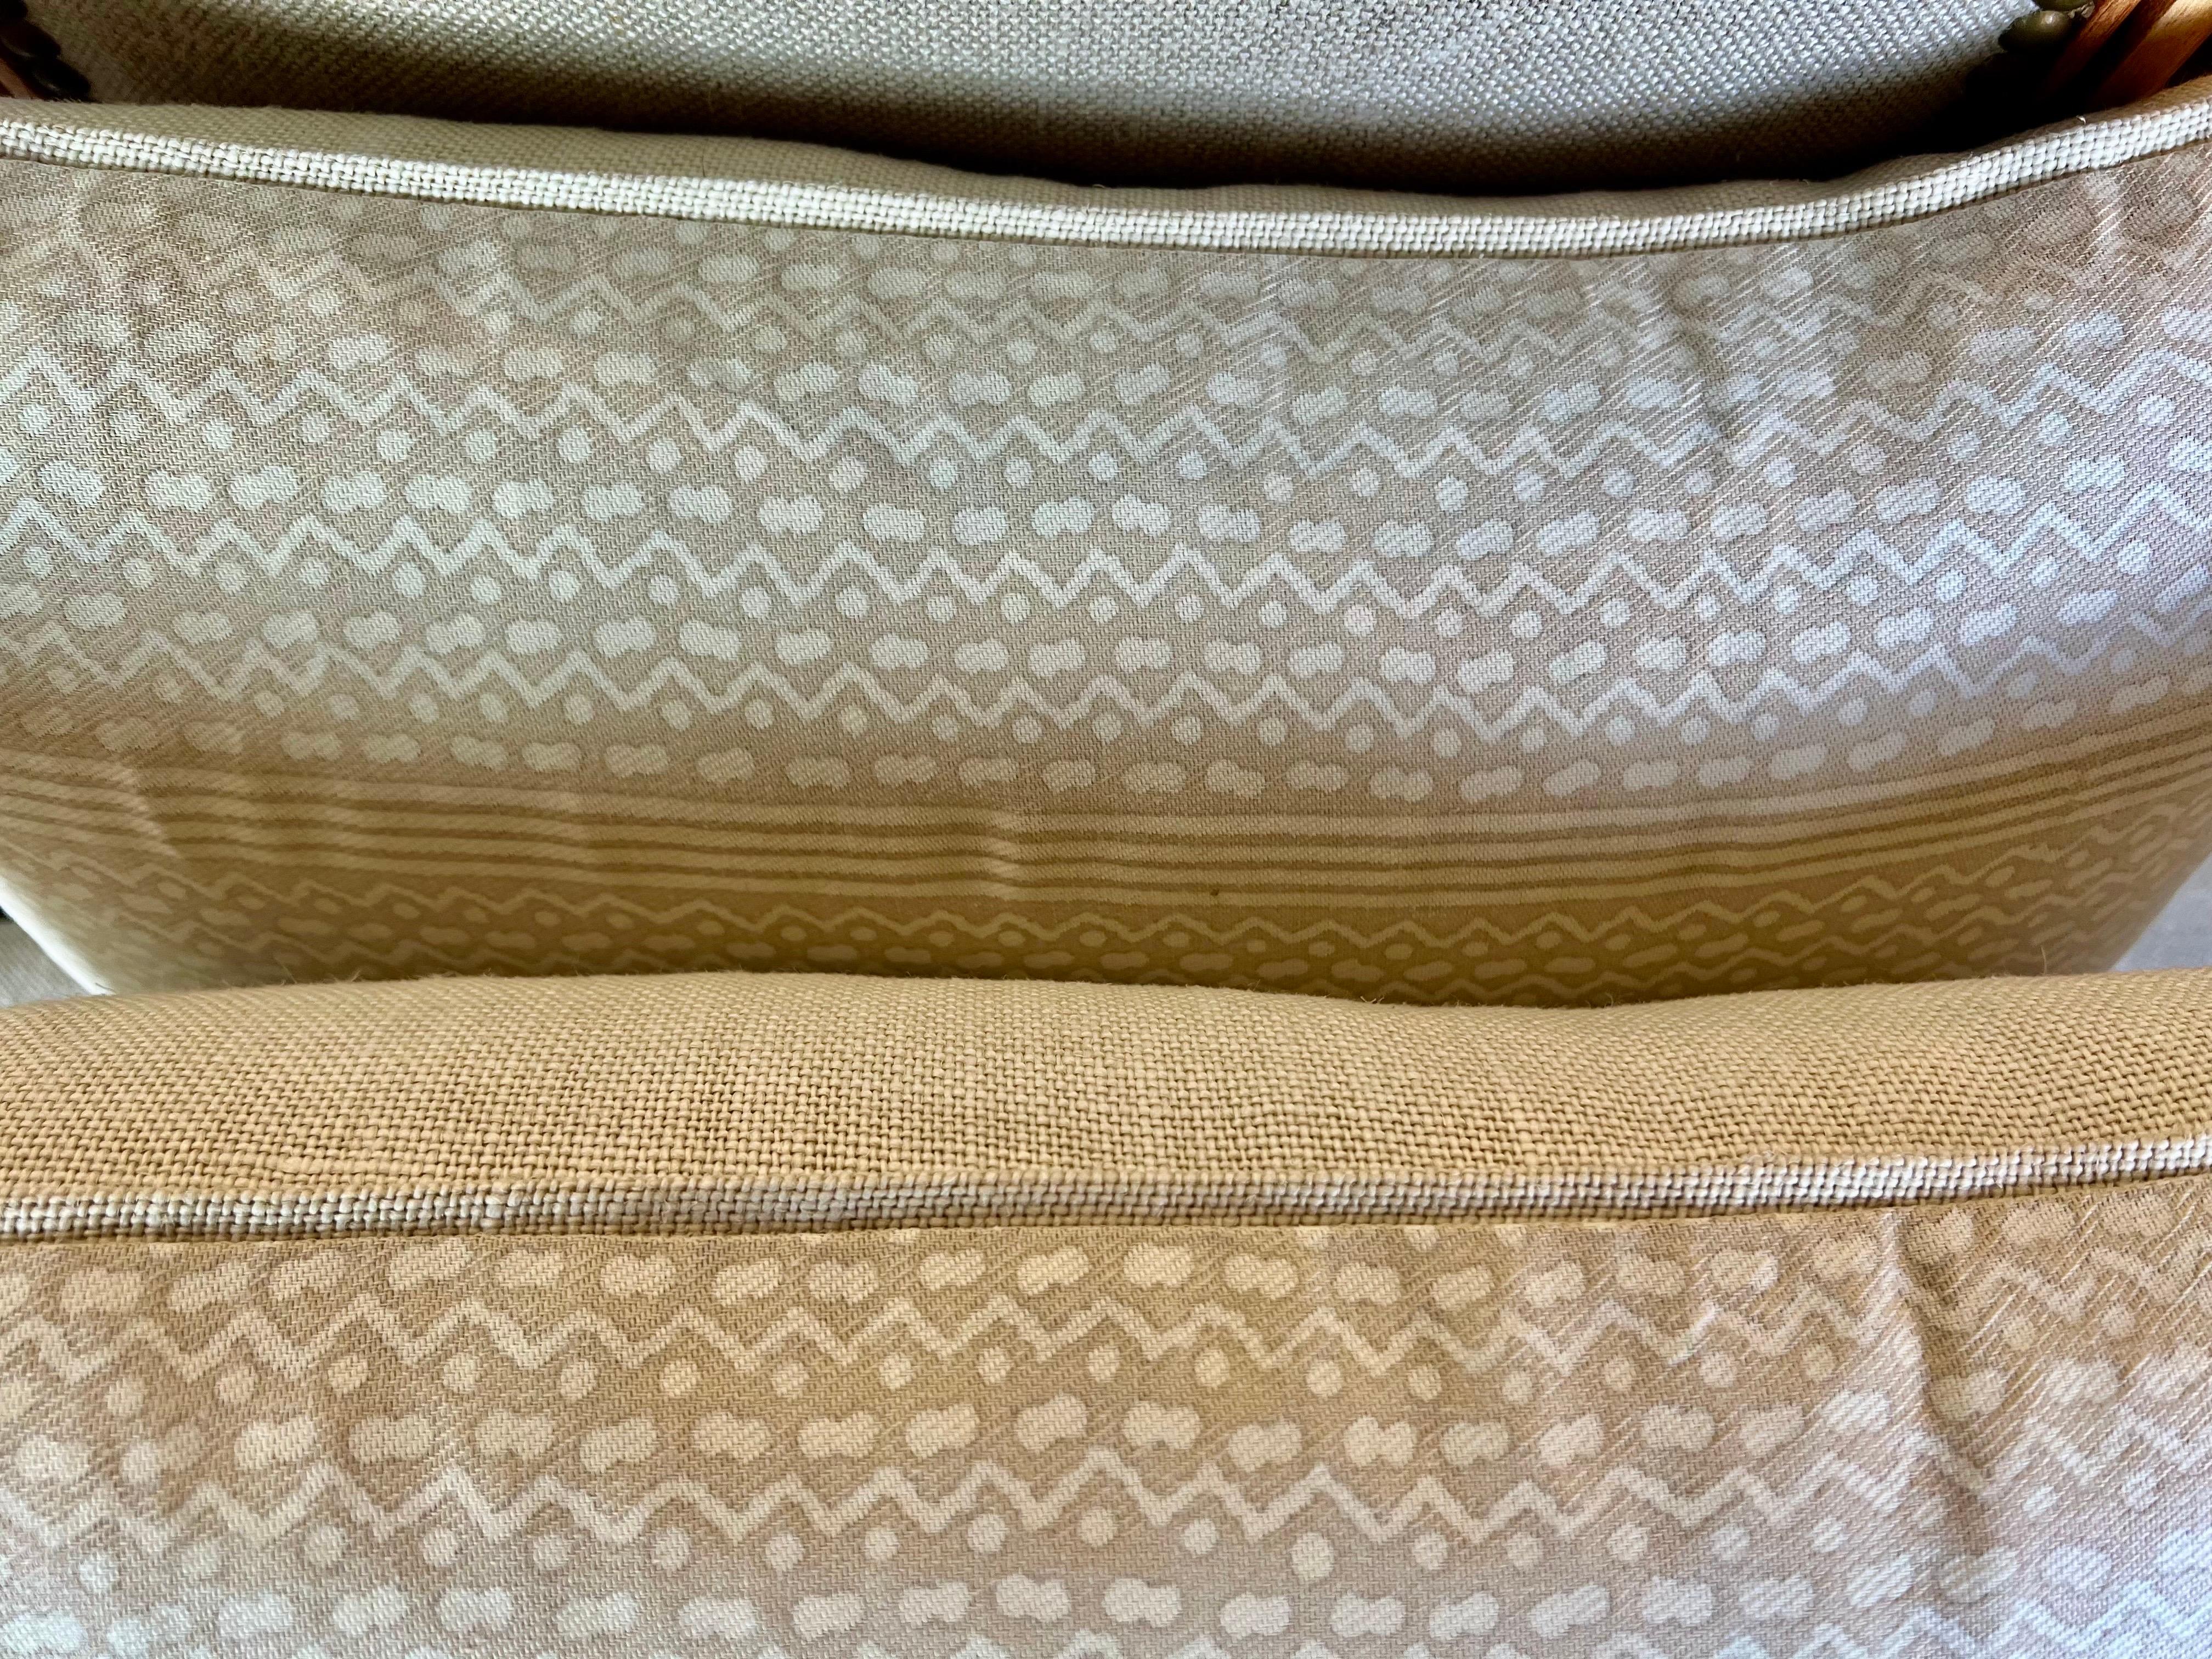 Modern Tapa Stripe Patterned Fortuny Textile Pillows w/ Linen Backs, Pair For Sale